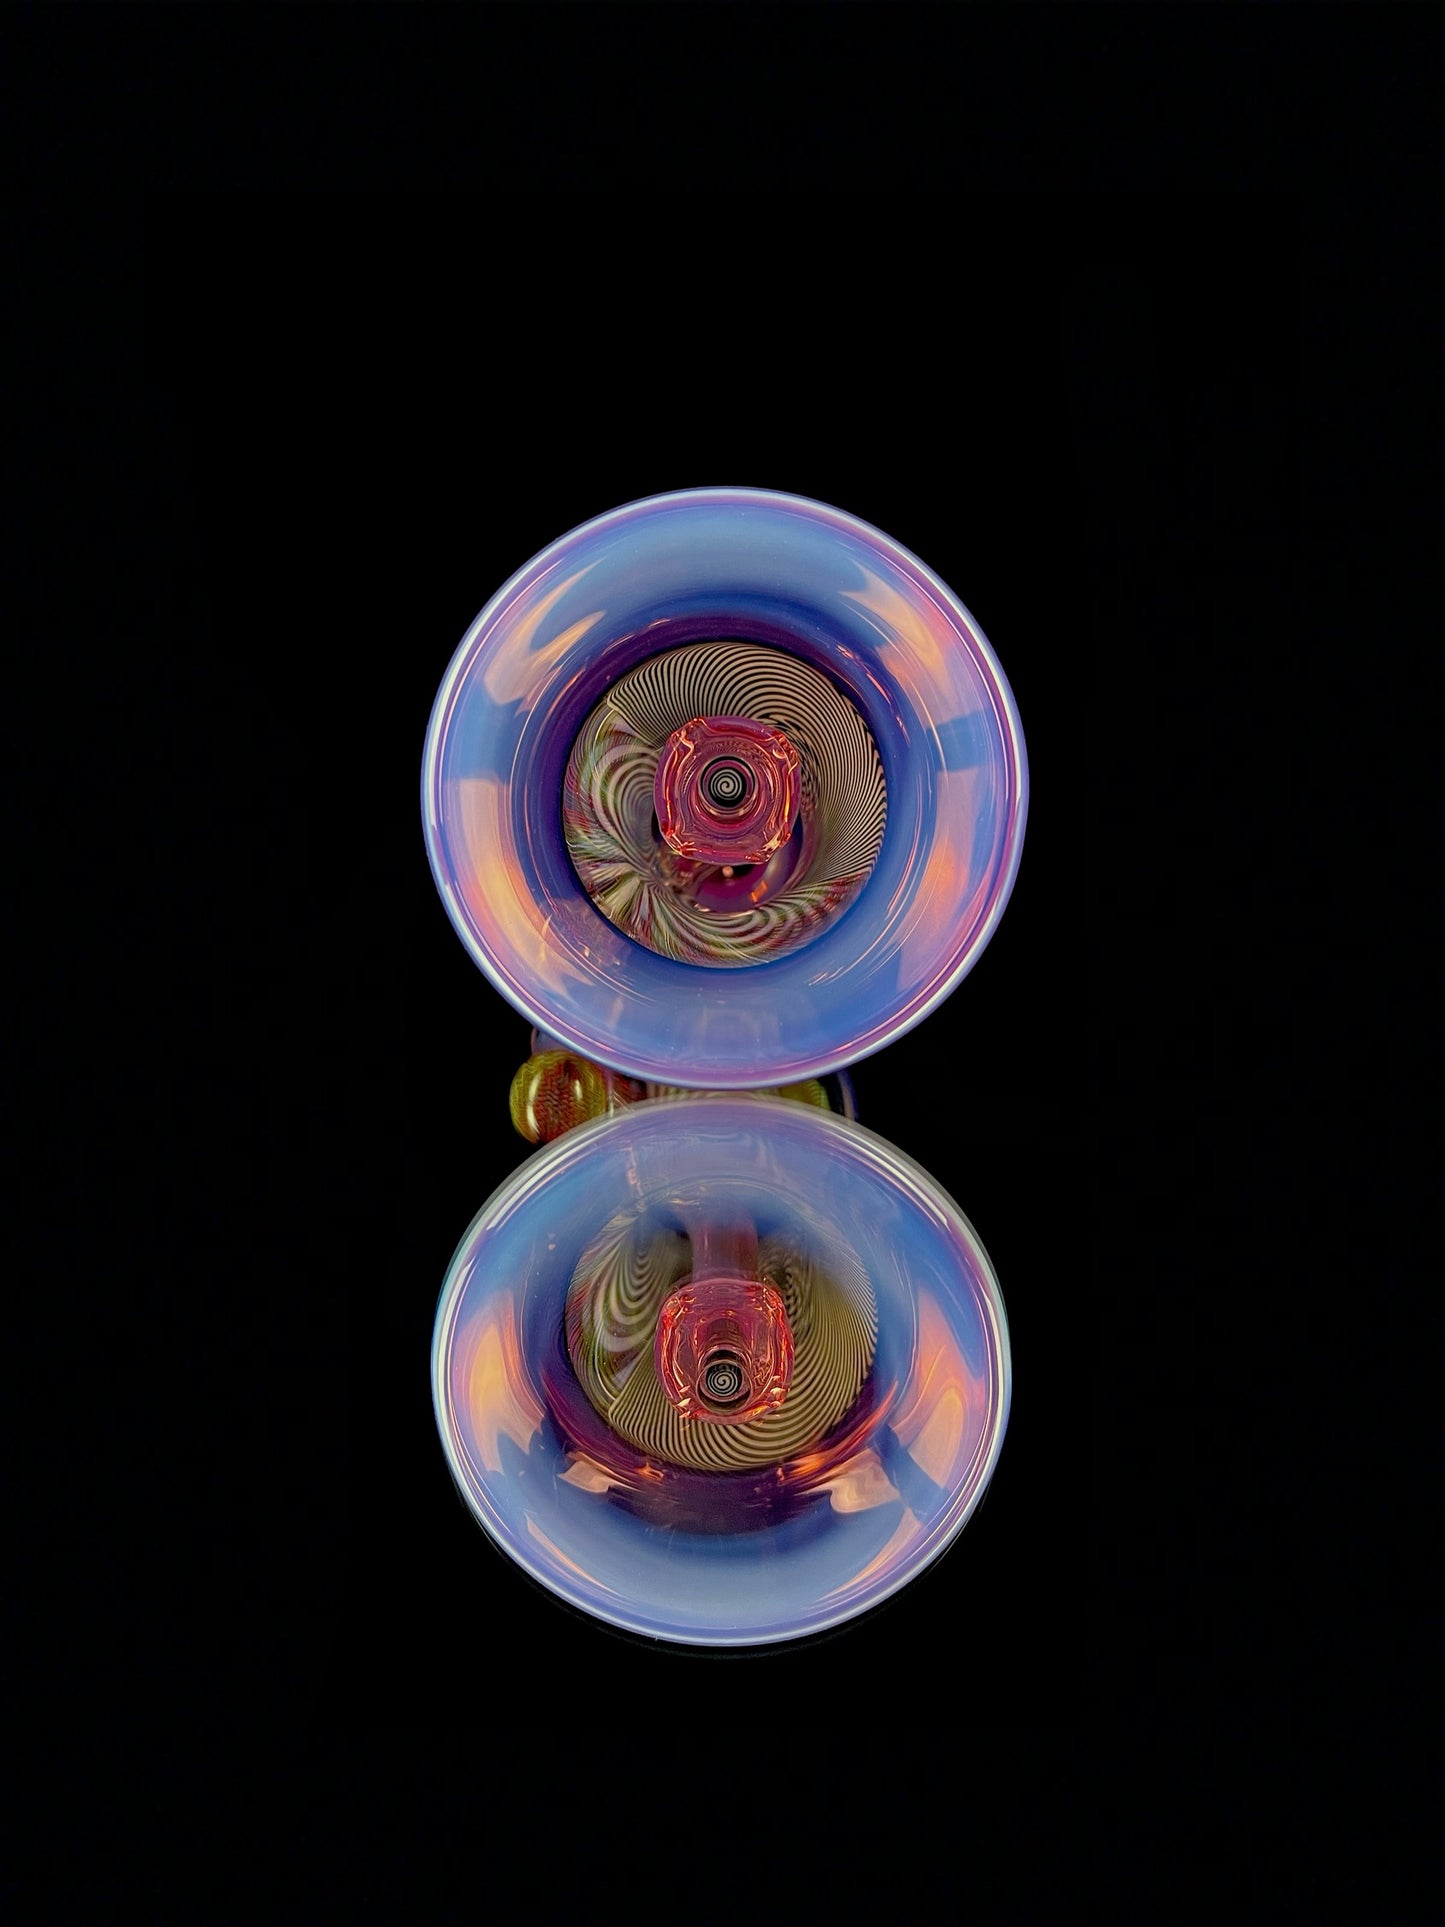 Moonstone over gold ruby classic hypno jawn by Jared Wetmore